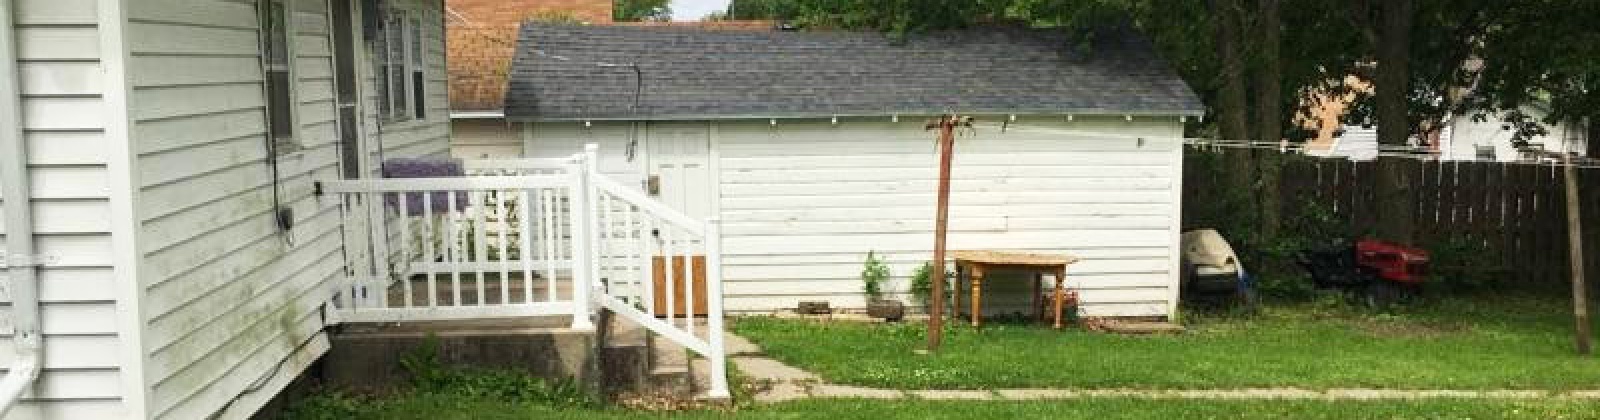 106 E 4th St,Firth,NE,68358,2 Bedrooms Bedrooms,1 BathroomBathrooms,House,106 E 4th St,1009